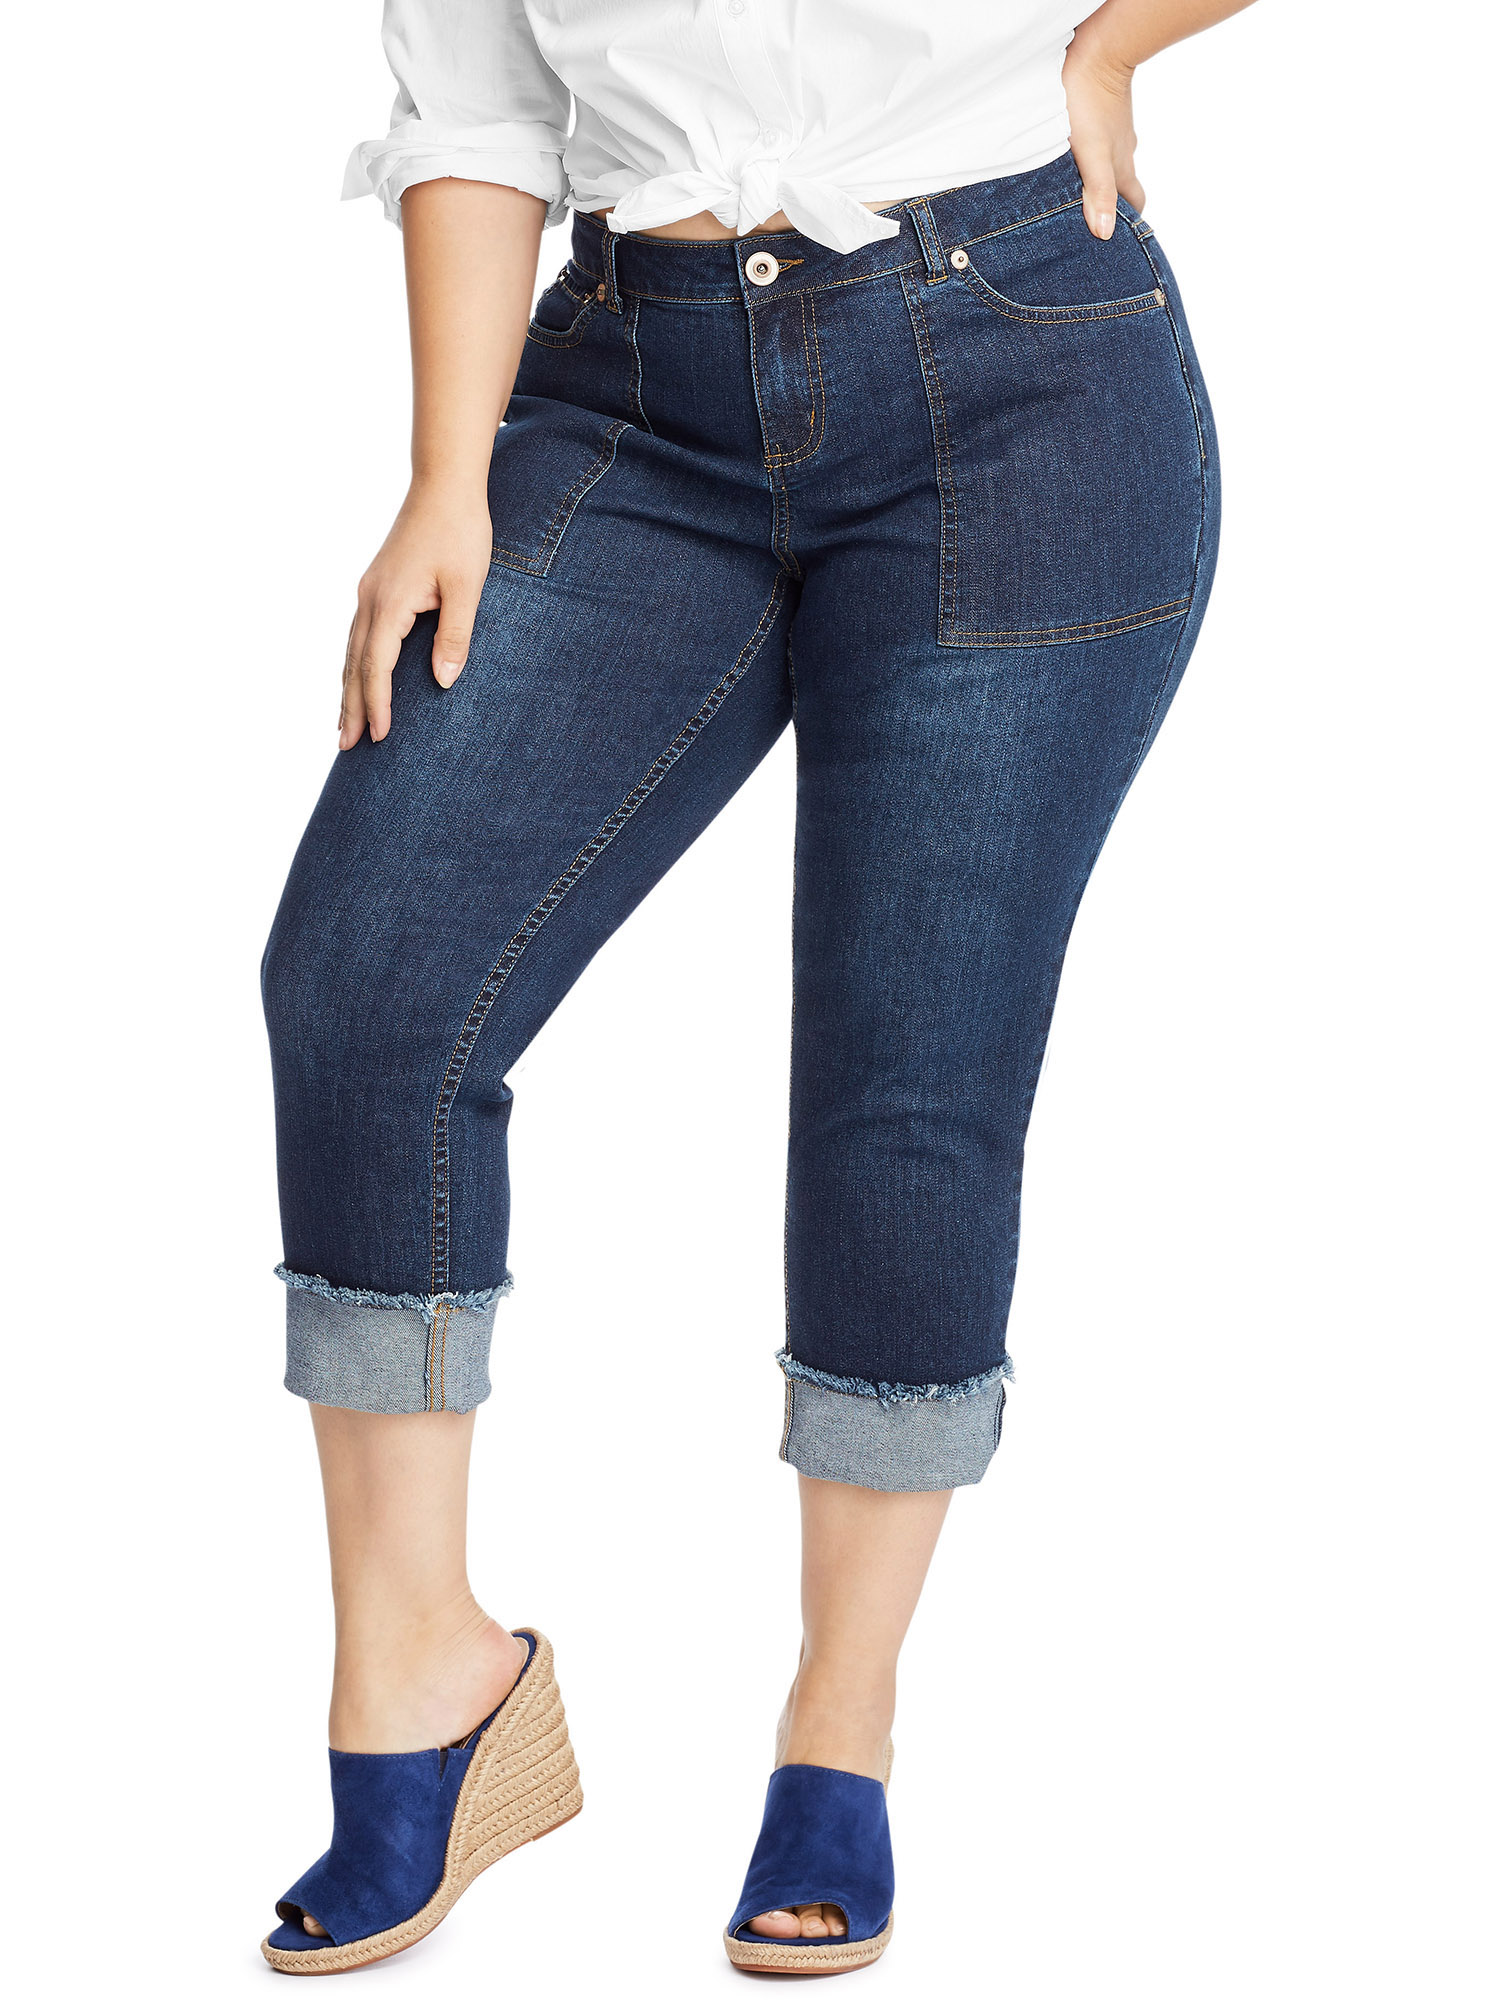 Just My Size Women's Plus Size Frayed Cuff Capri Jeans - image 1 of 4